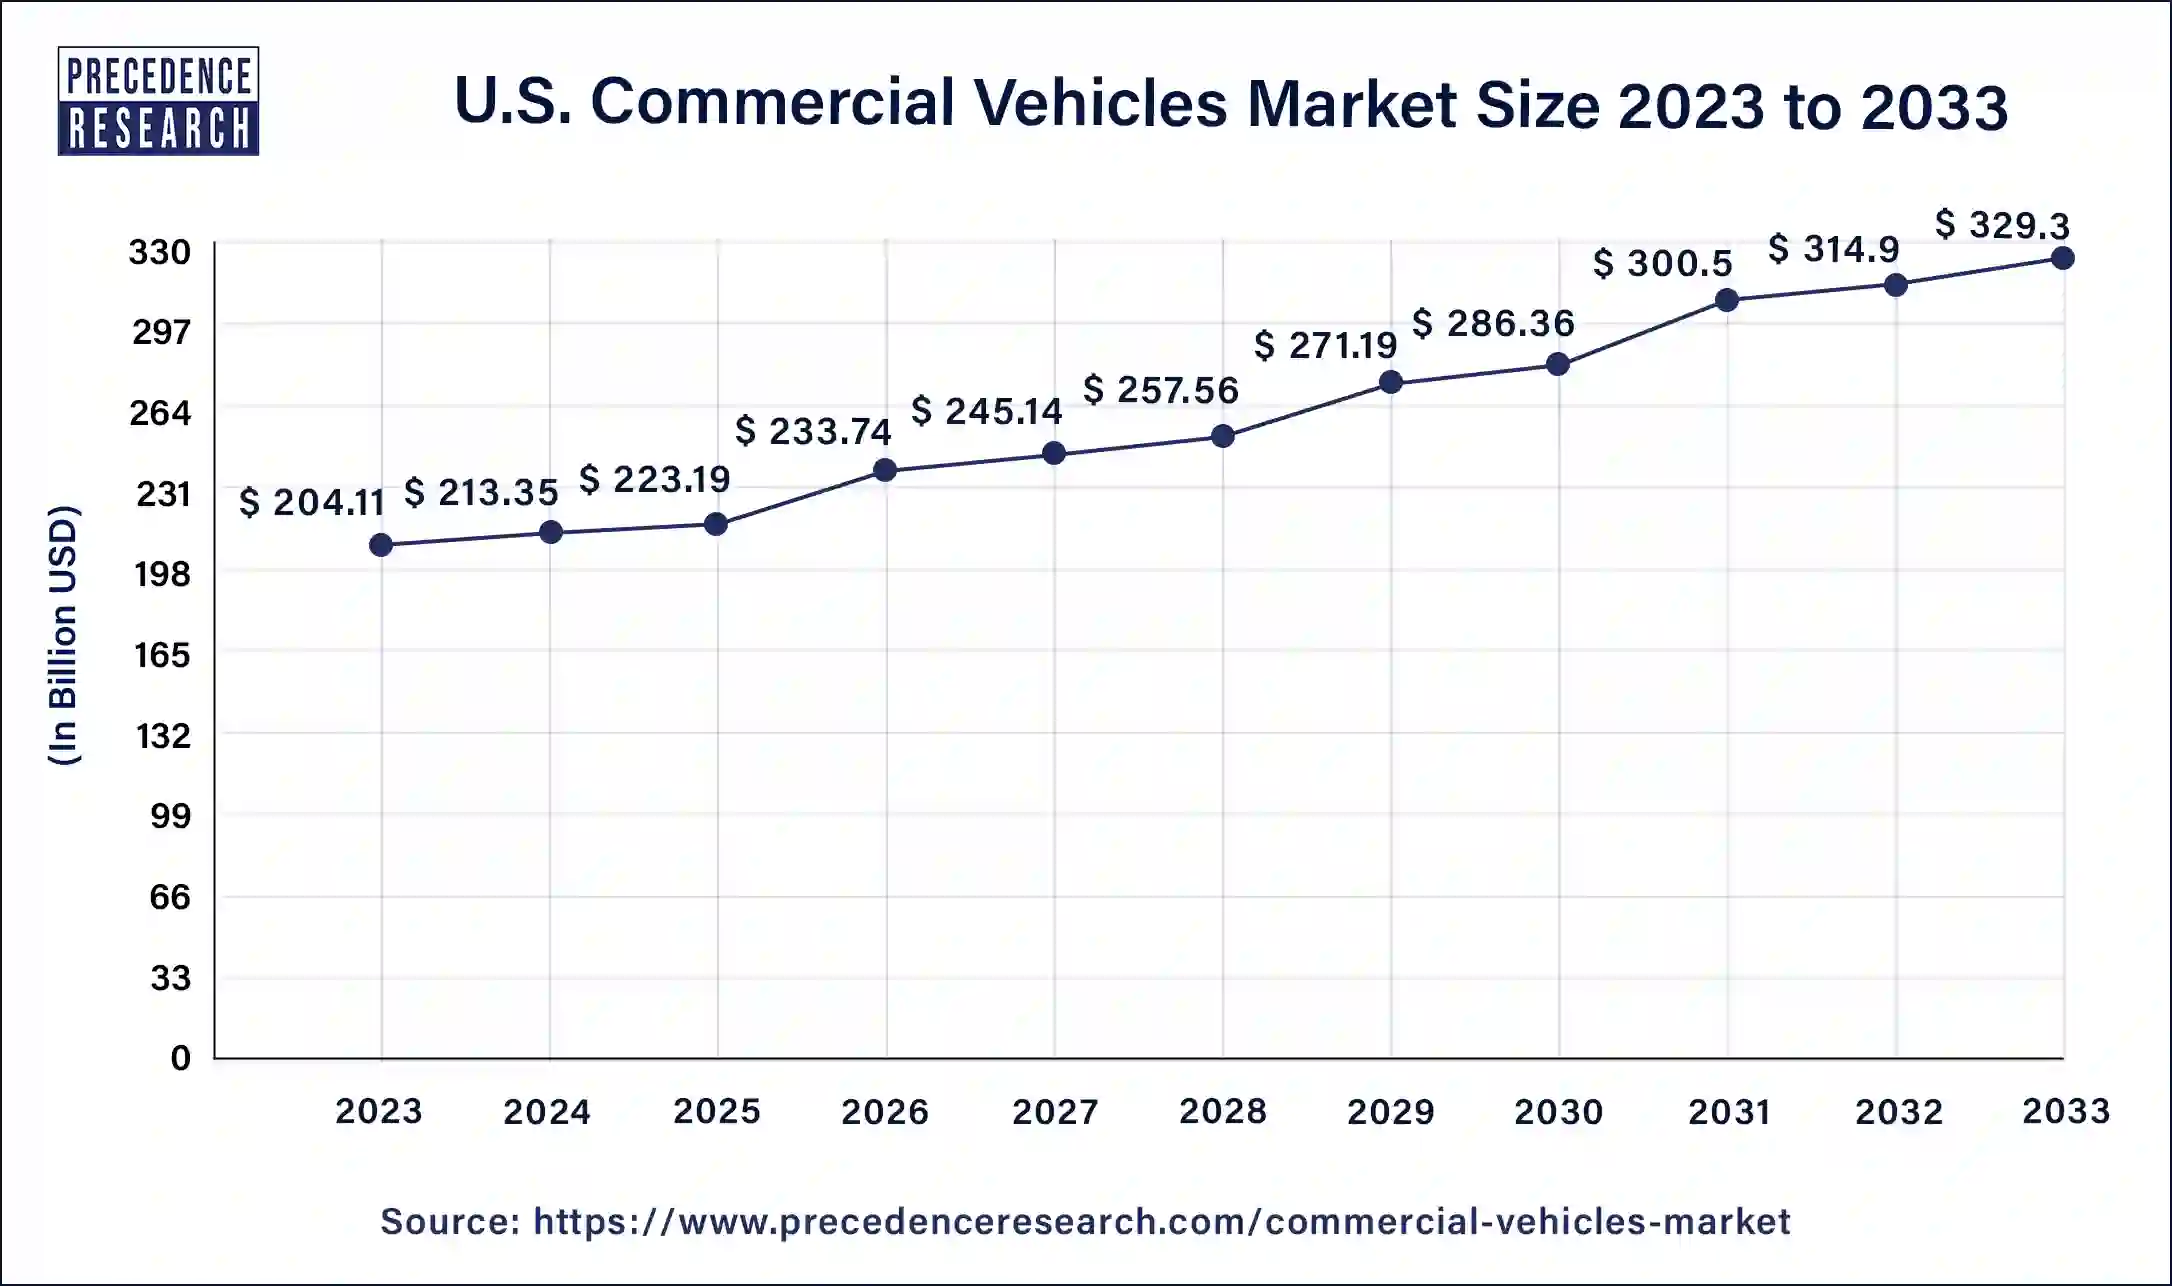 U.S. Commercial Vehicles Market Size 2024 to 2033